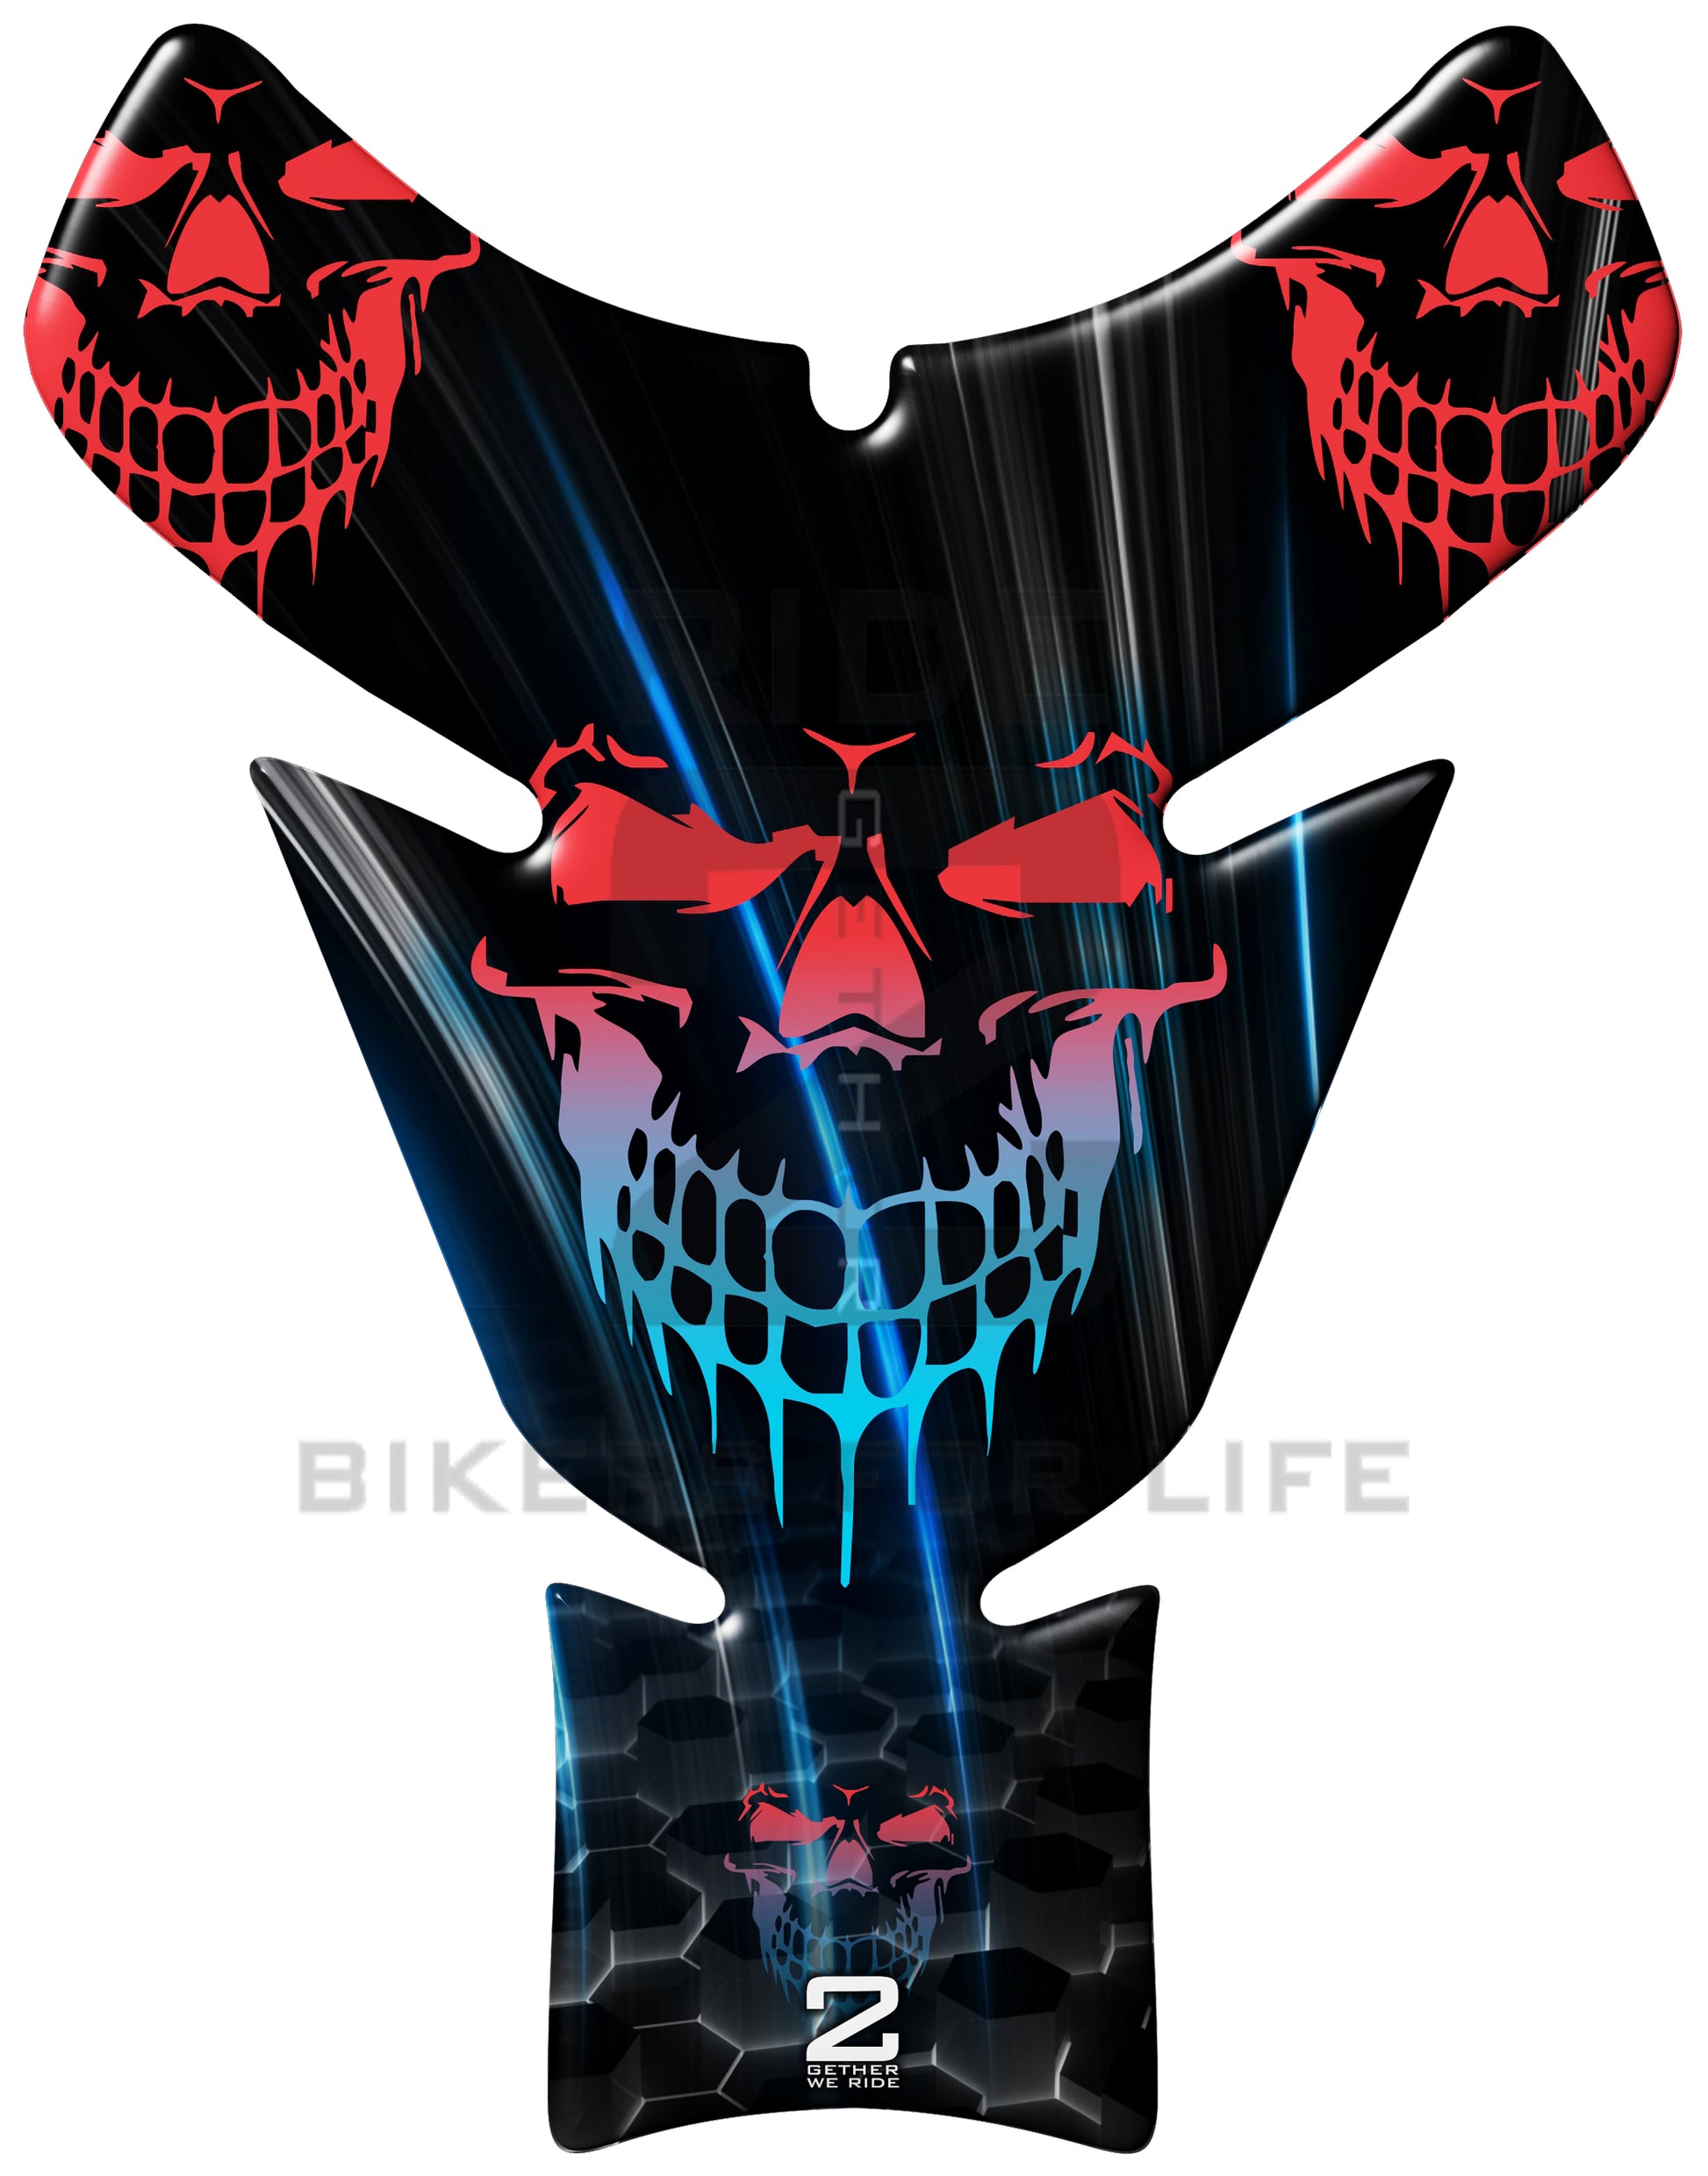 Universal Fit Black, Red and Blue Smiling Reaper Motor Bike Tank Pad Protector. A Street Pad which fits most motorcycles.